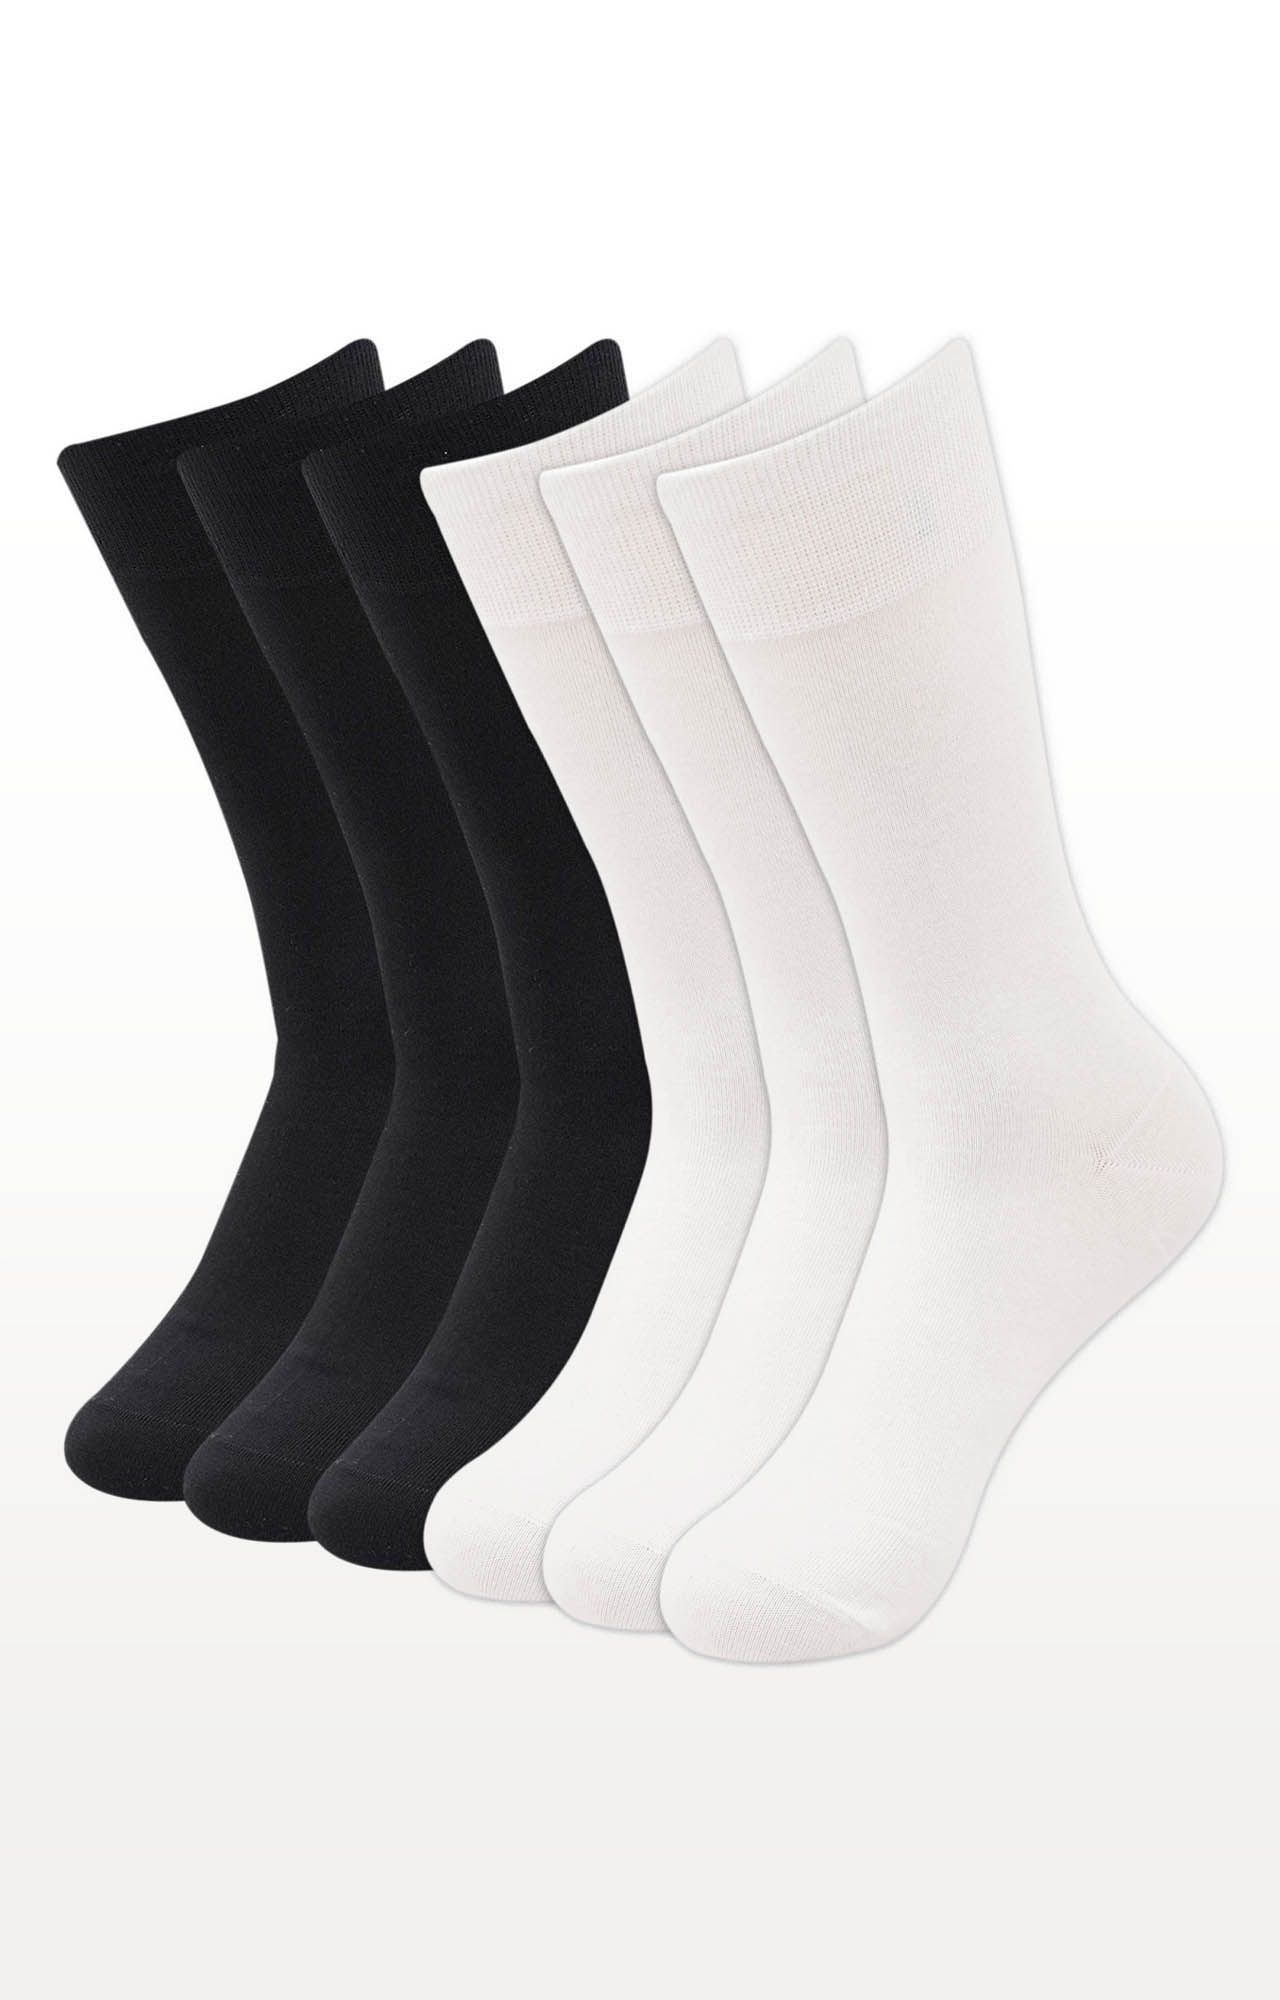 BALENZIA | Black and White Solid Socks - (Pack of 6)